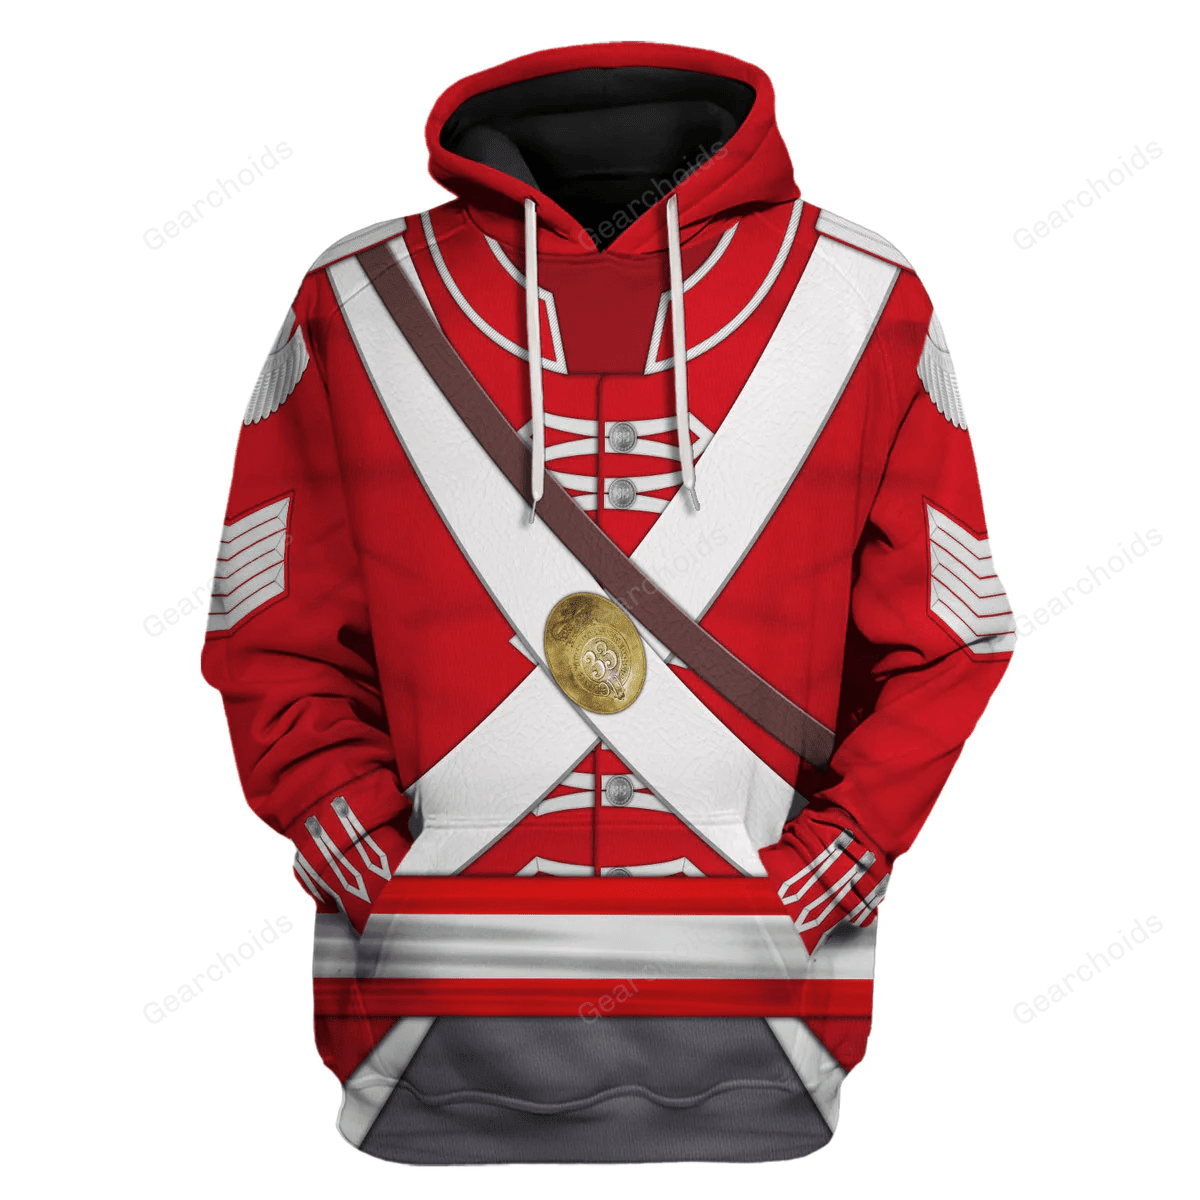 Gearchoids 33rd Foot (1st Yorkshire West Riding) Sergeant- Centre Company (1812-1815) Uniform All Over Print Hoodie Sweatshirt T-Shirt Tracksuit